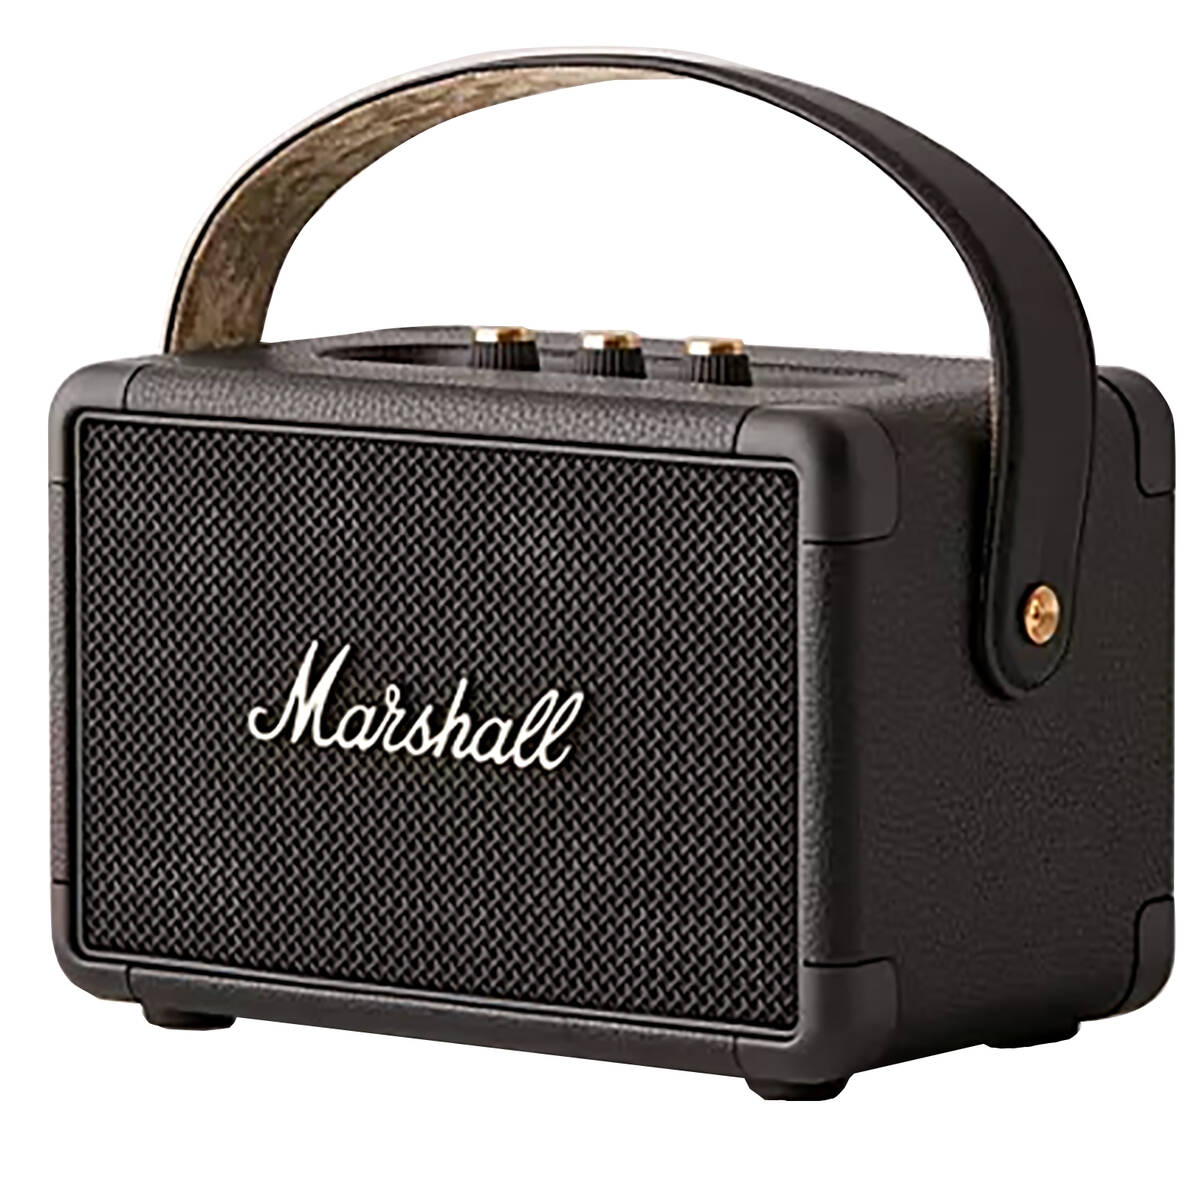 3. Kilburn II Portable Bluetooth Speaker Someone you love can now rock out in classic rock styl ...